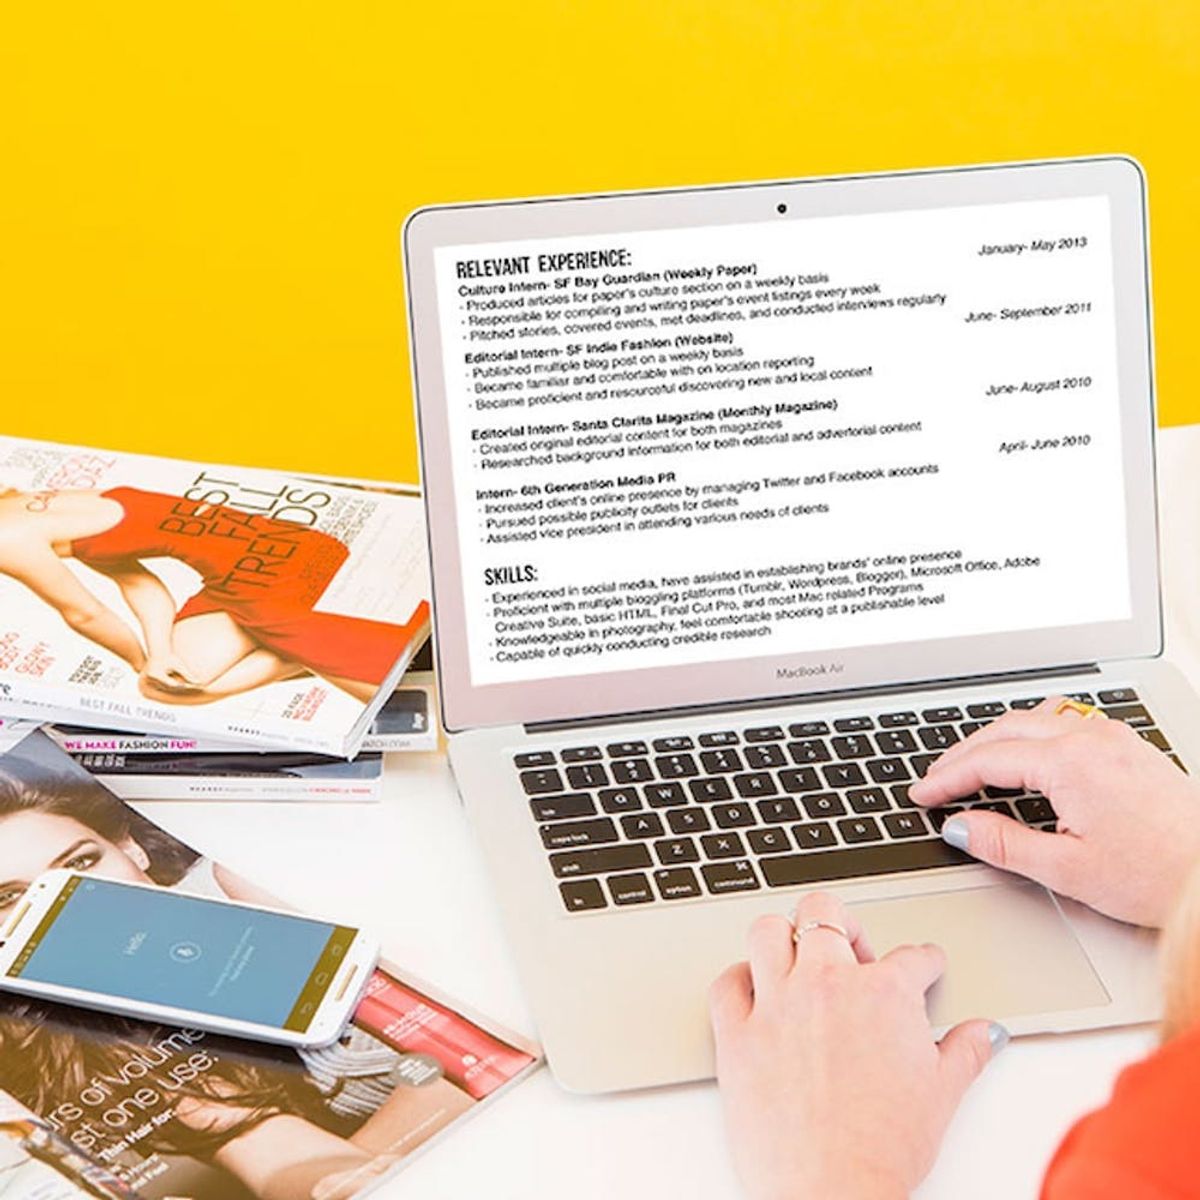 5 Last-Minute Tricks to Take Your Resume from Basic to Brilliant